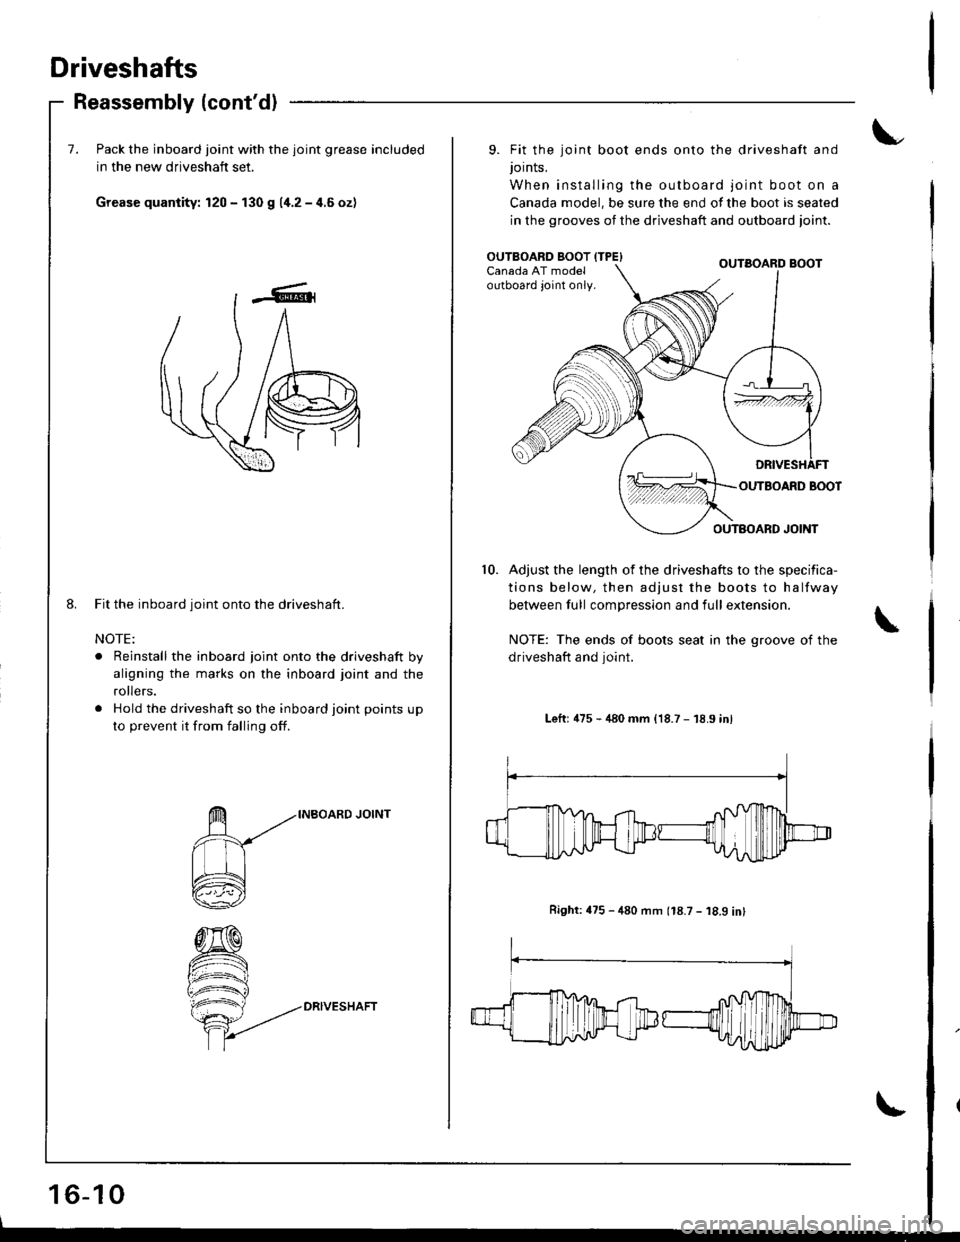 HONDA INTEGRA 1998 4.G Workshop Manual Driveshafts
Reassembly (contd)
7. Pack the inboard joint with the joint grease included
in the new driveshaft set.
Grease quantity: 120 - f30 g 11.2-4.6ozl
Fit the inboard joint onto the driveshaft.
